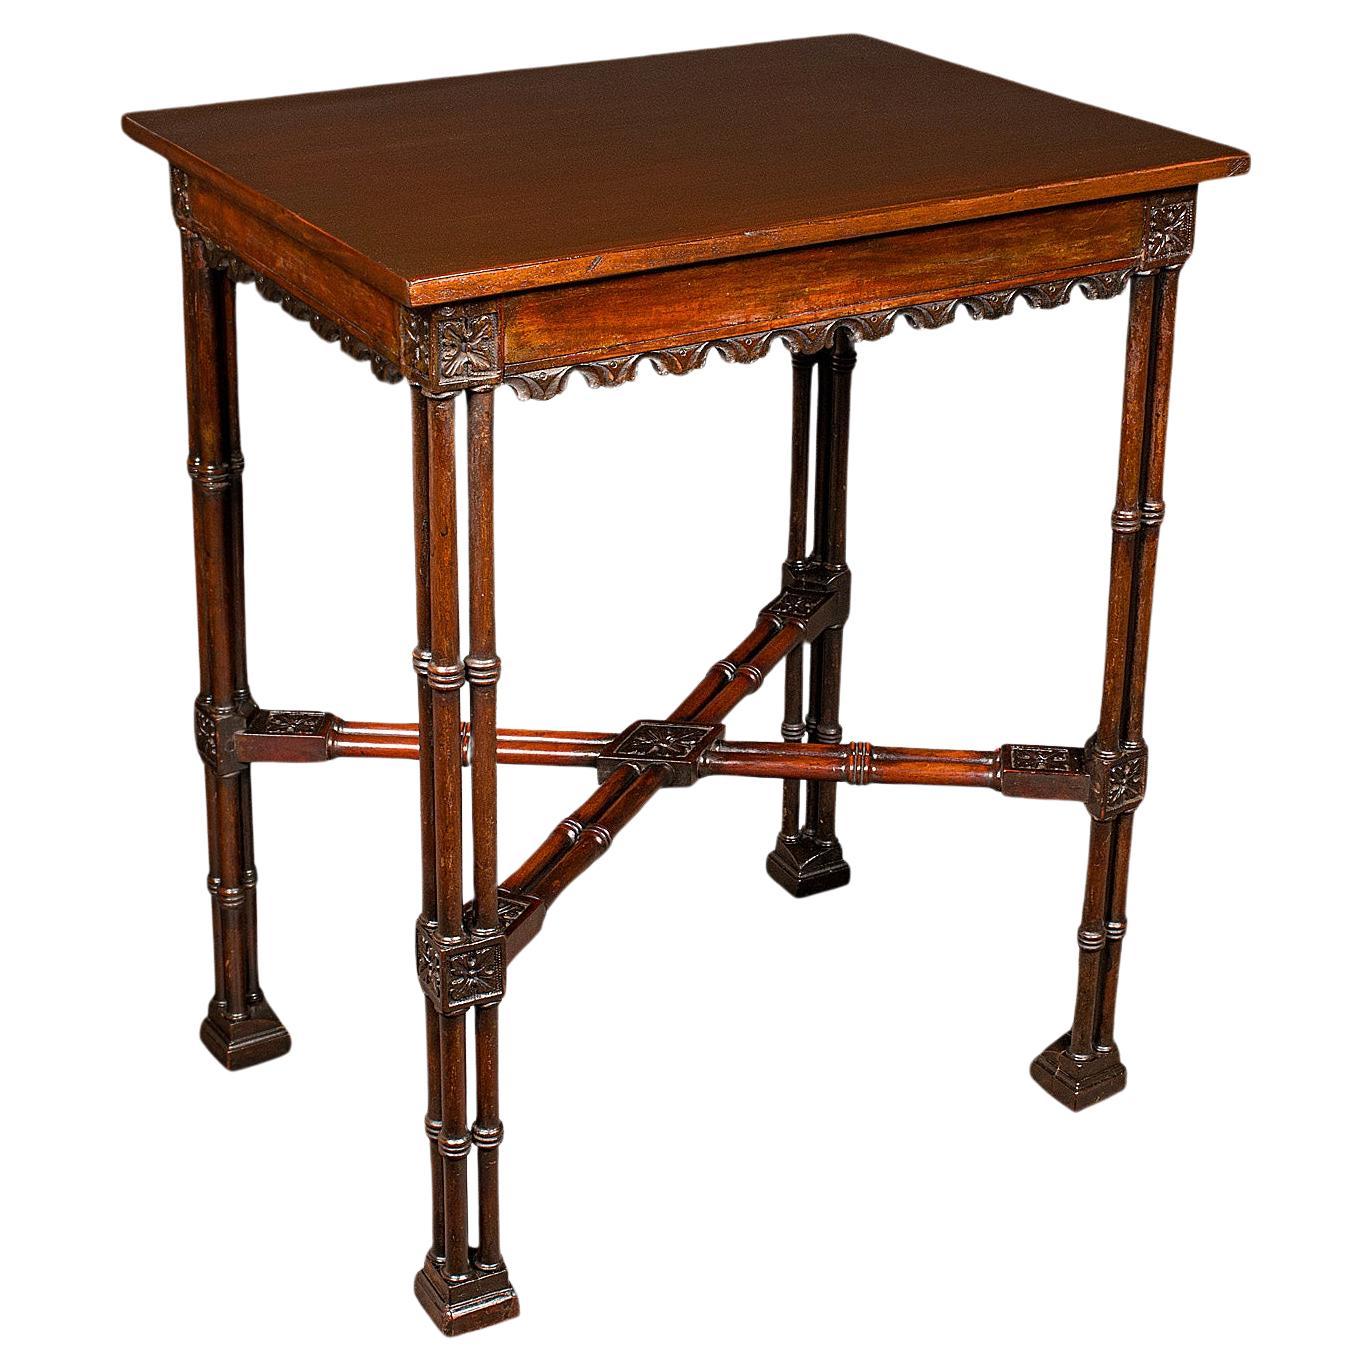 Antique Side Table, English, Occasional, Chippendale Taste, Georgian, Circa 1800